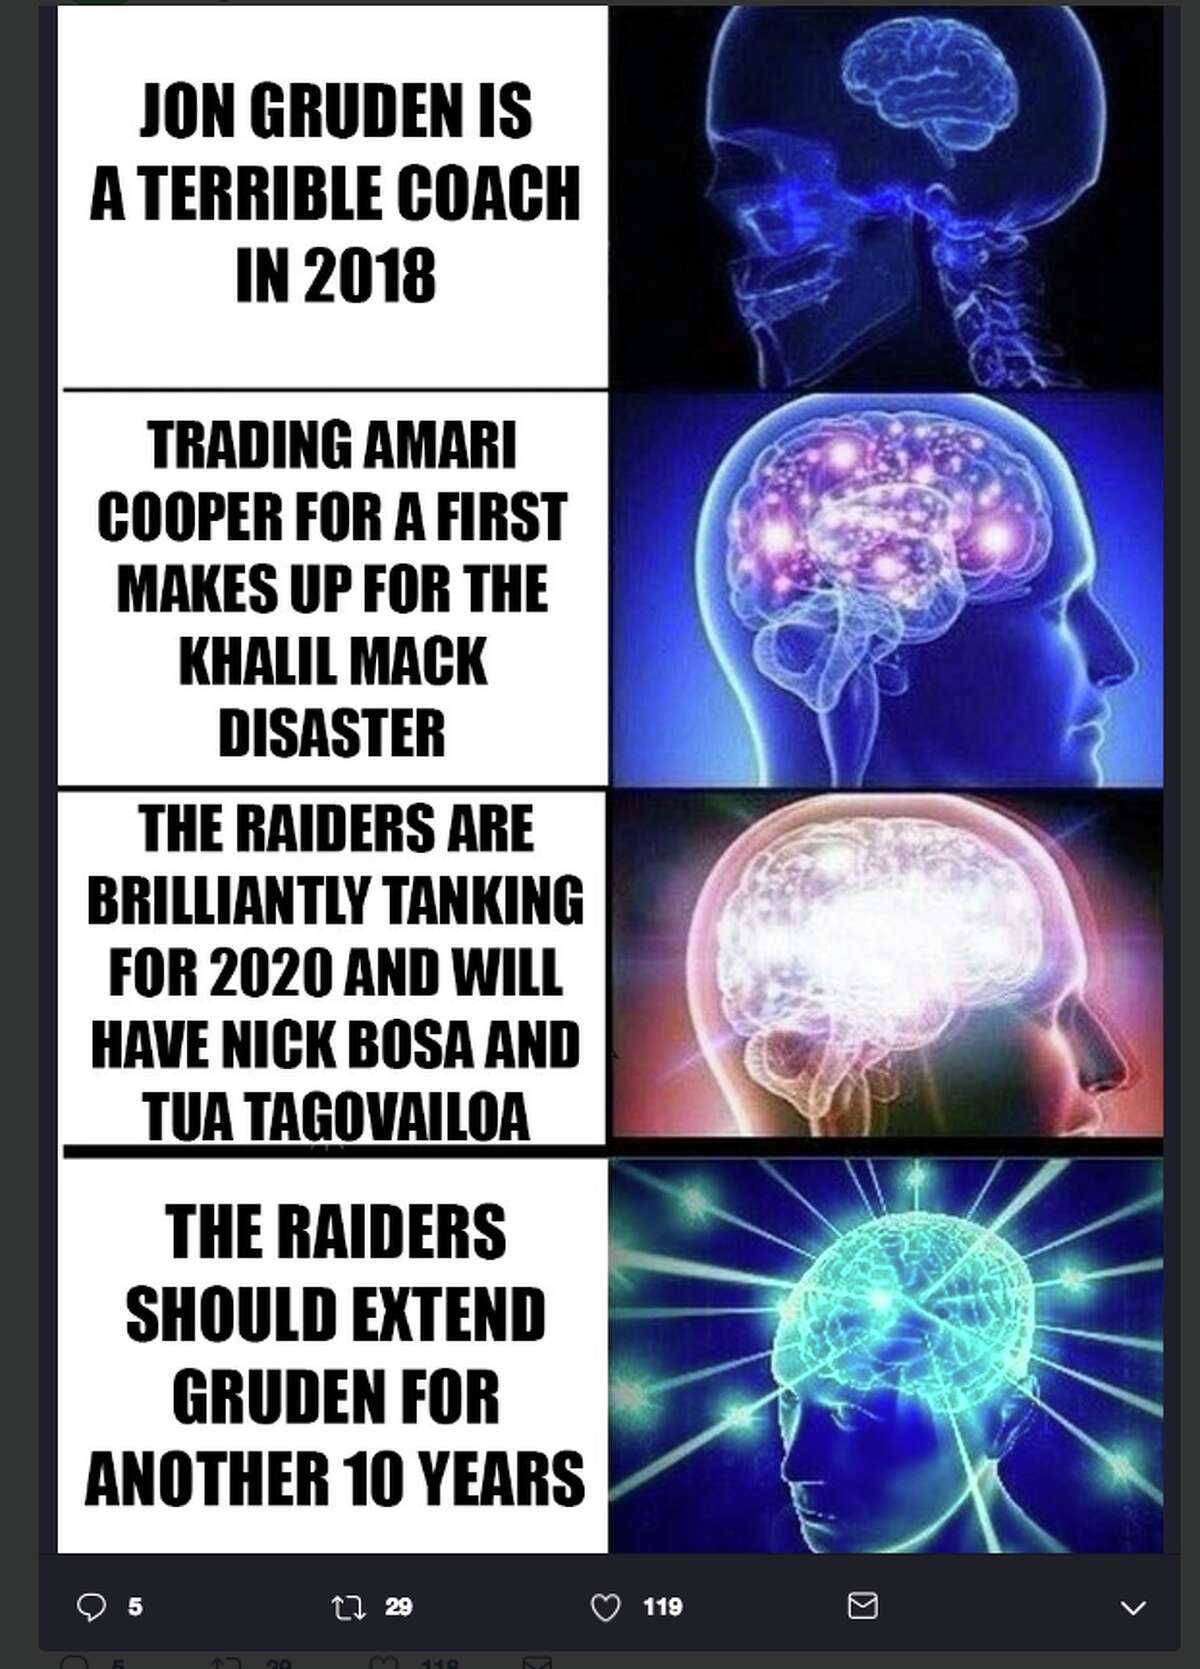 Twitter reacts to news that the Oakland Raiders traded wide receiver Amari Cooper to the Dallas Cowboys in exchange for a first-round draft pick.